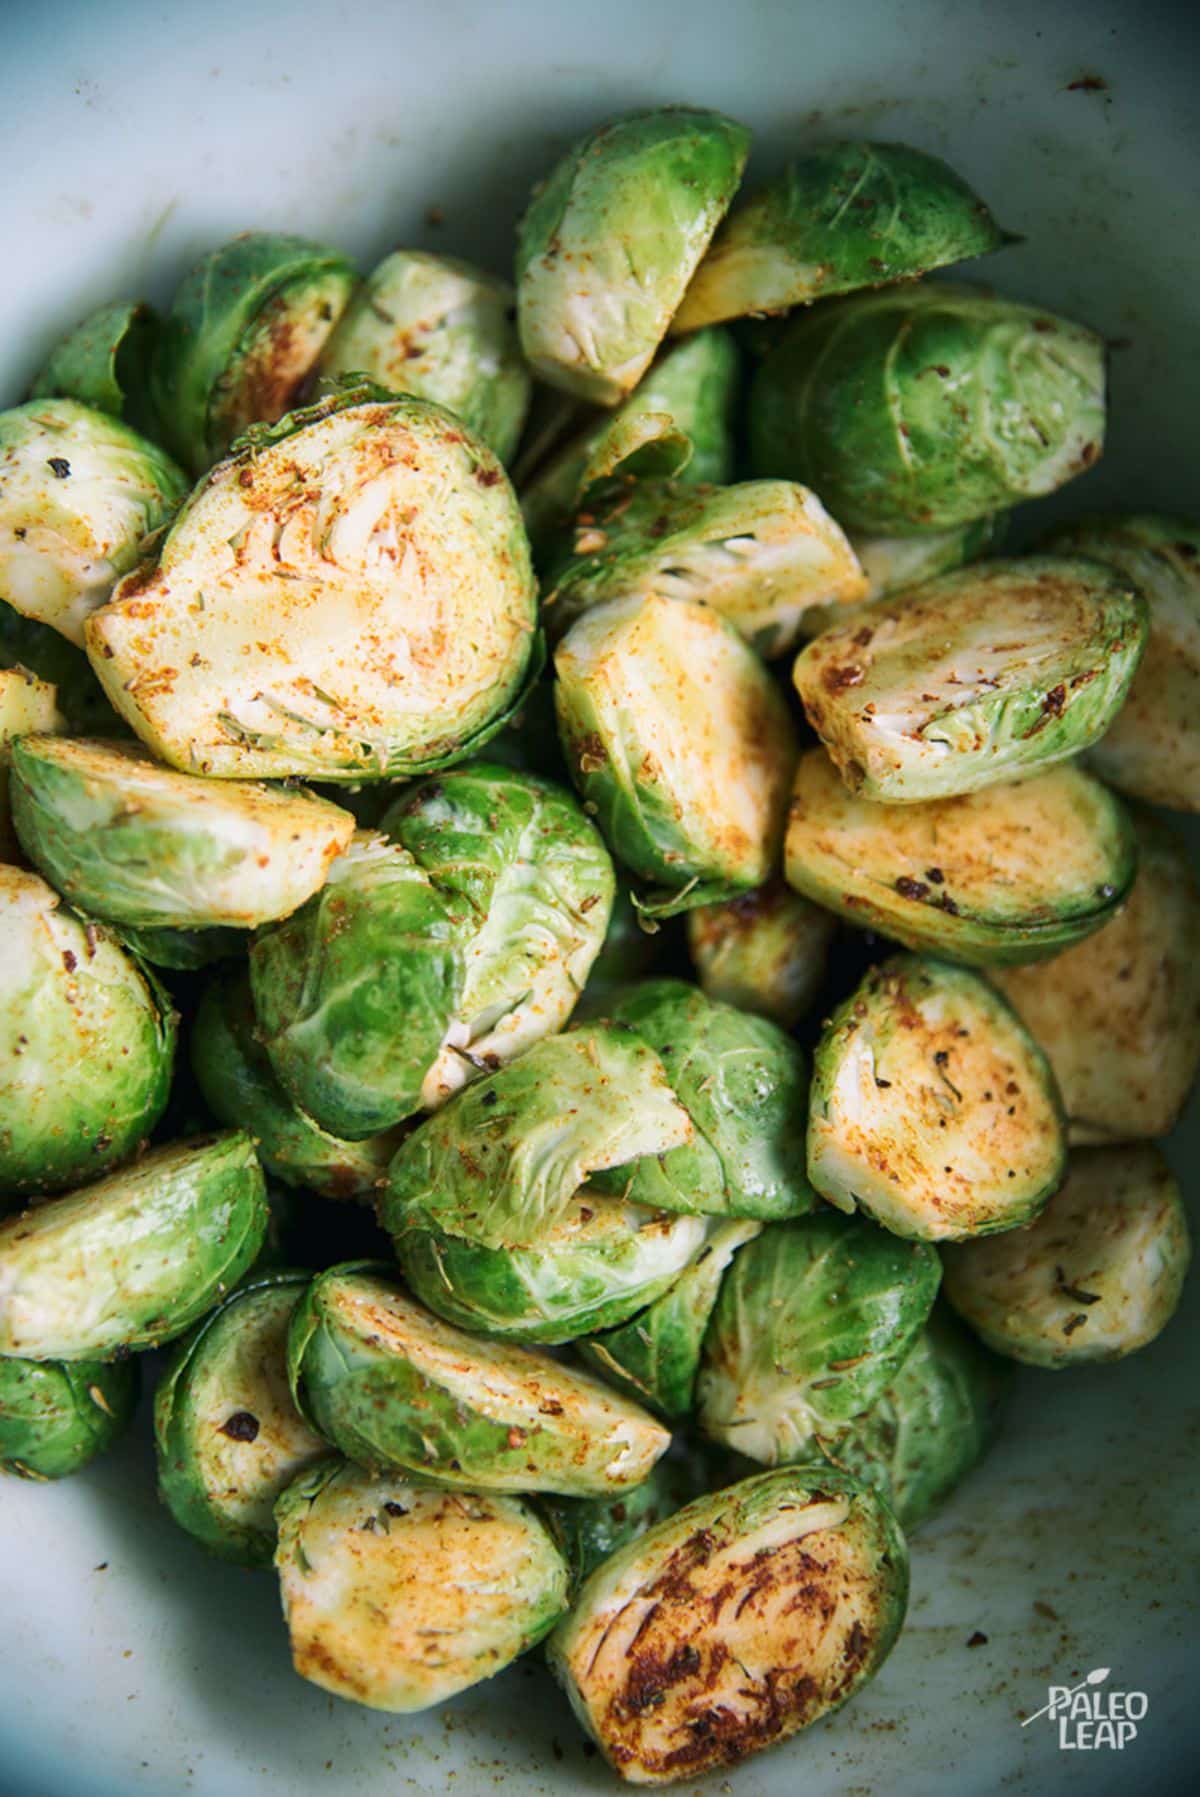 Grilled Spiced Brussels Sprouts Recipe Preparation